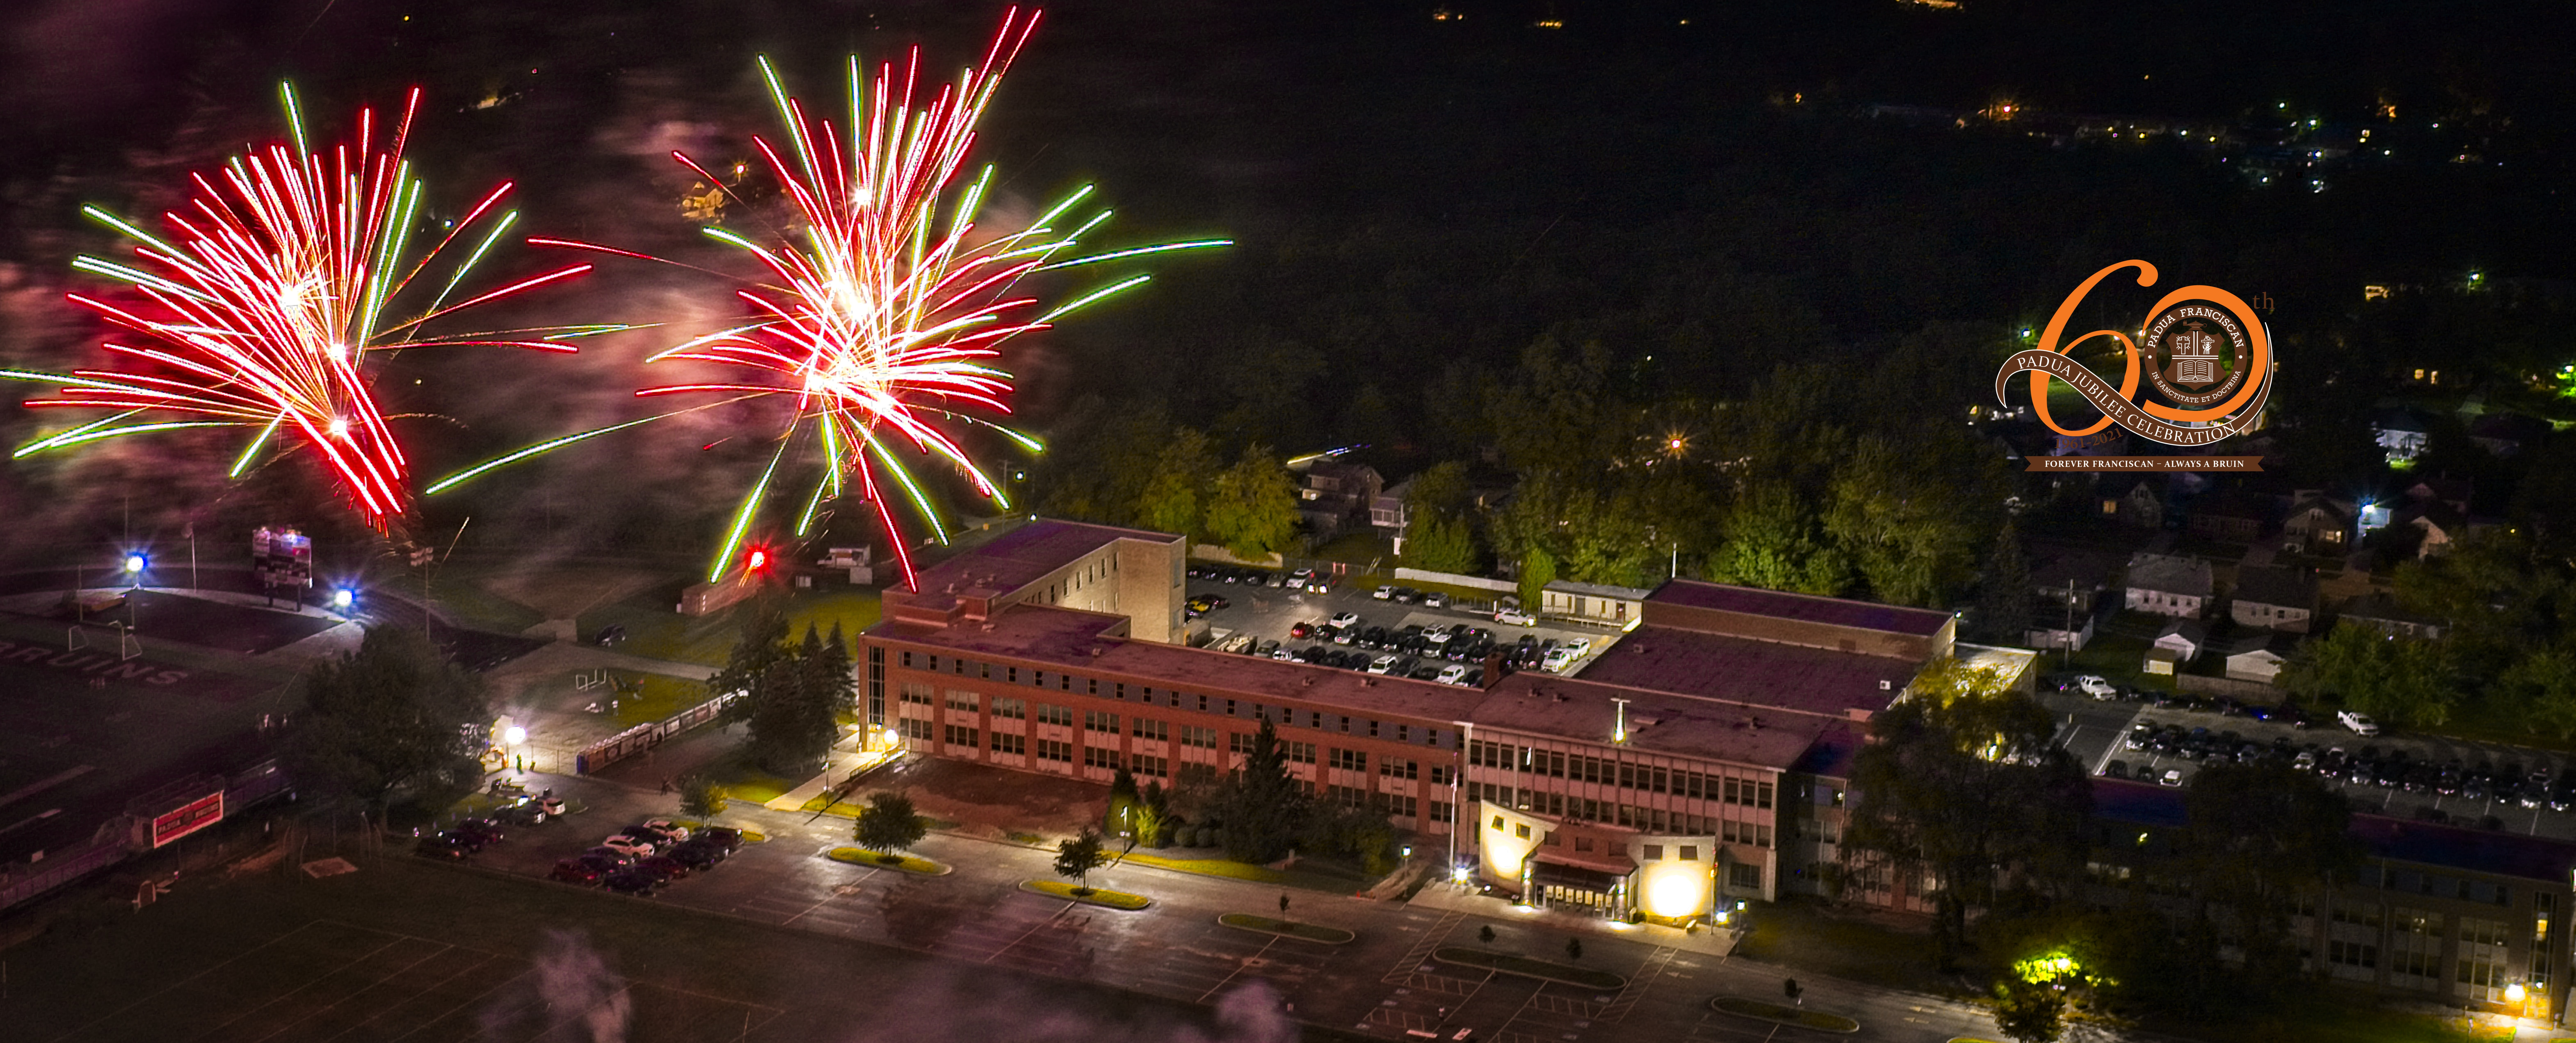 Fireworks going off outside the Padua Franciscan High School in Parma, OH in celebration of 60 years